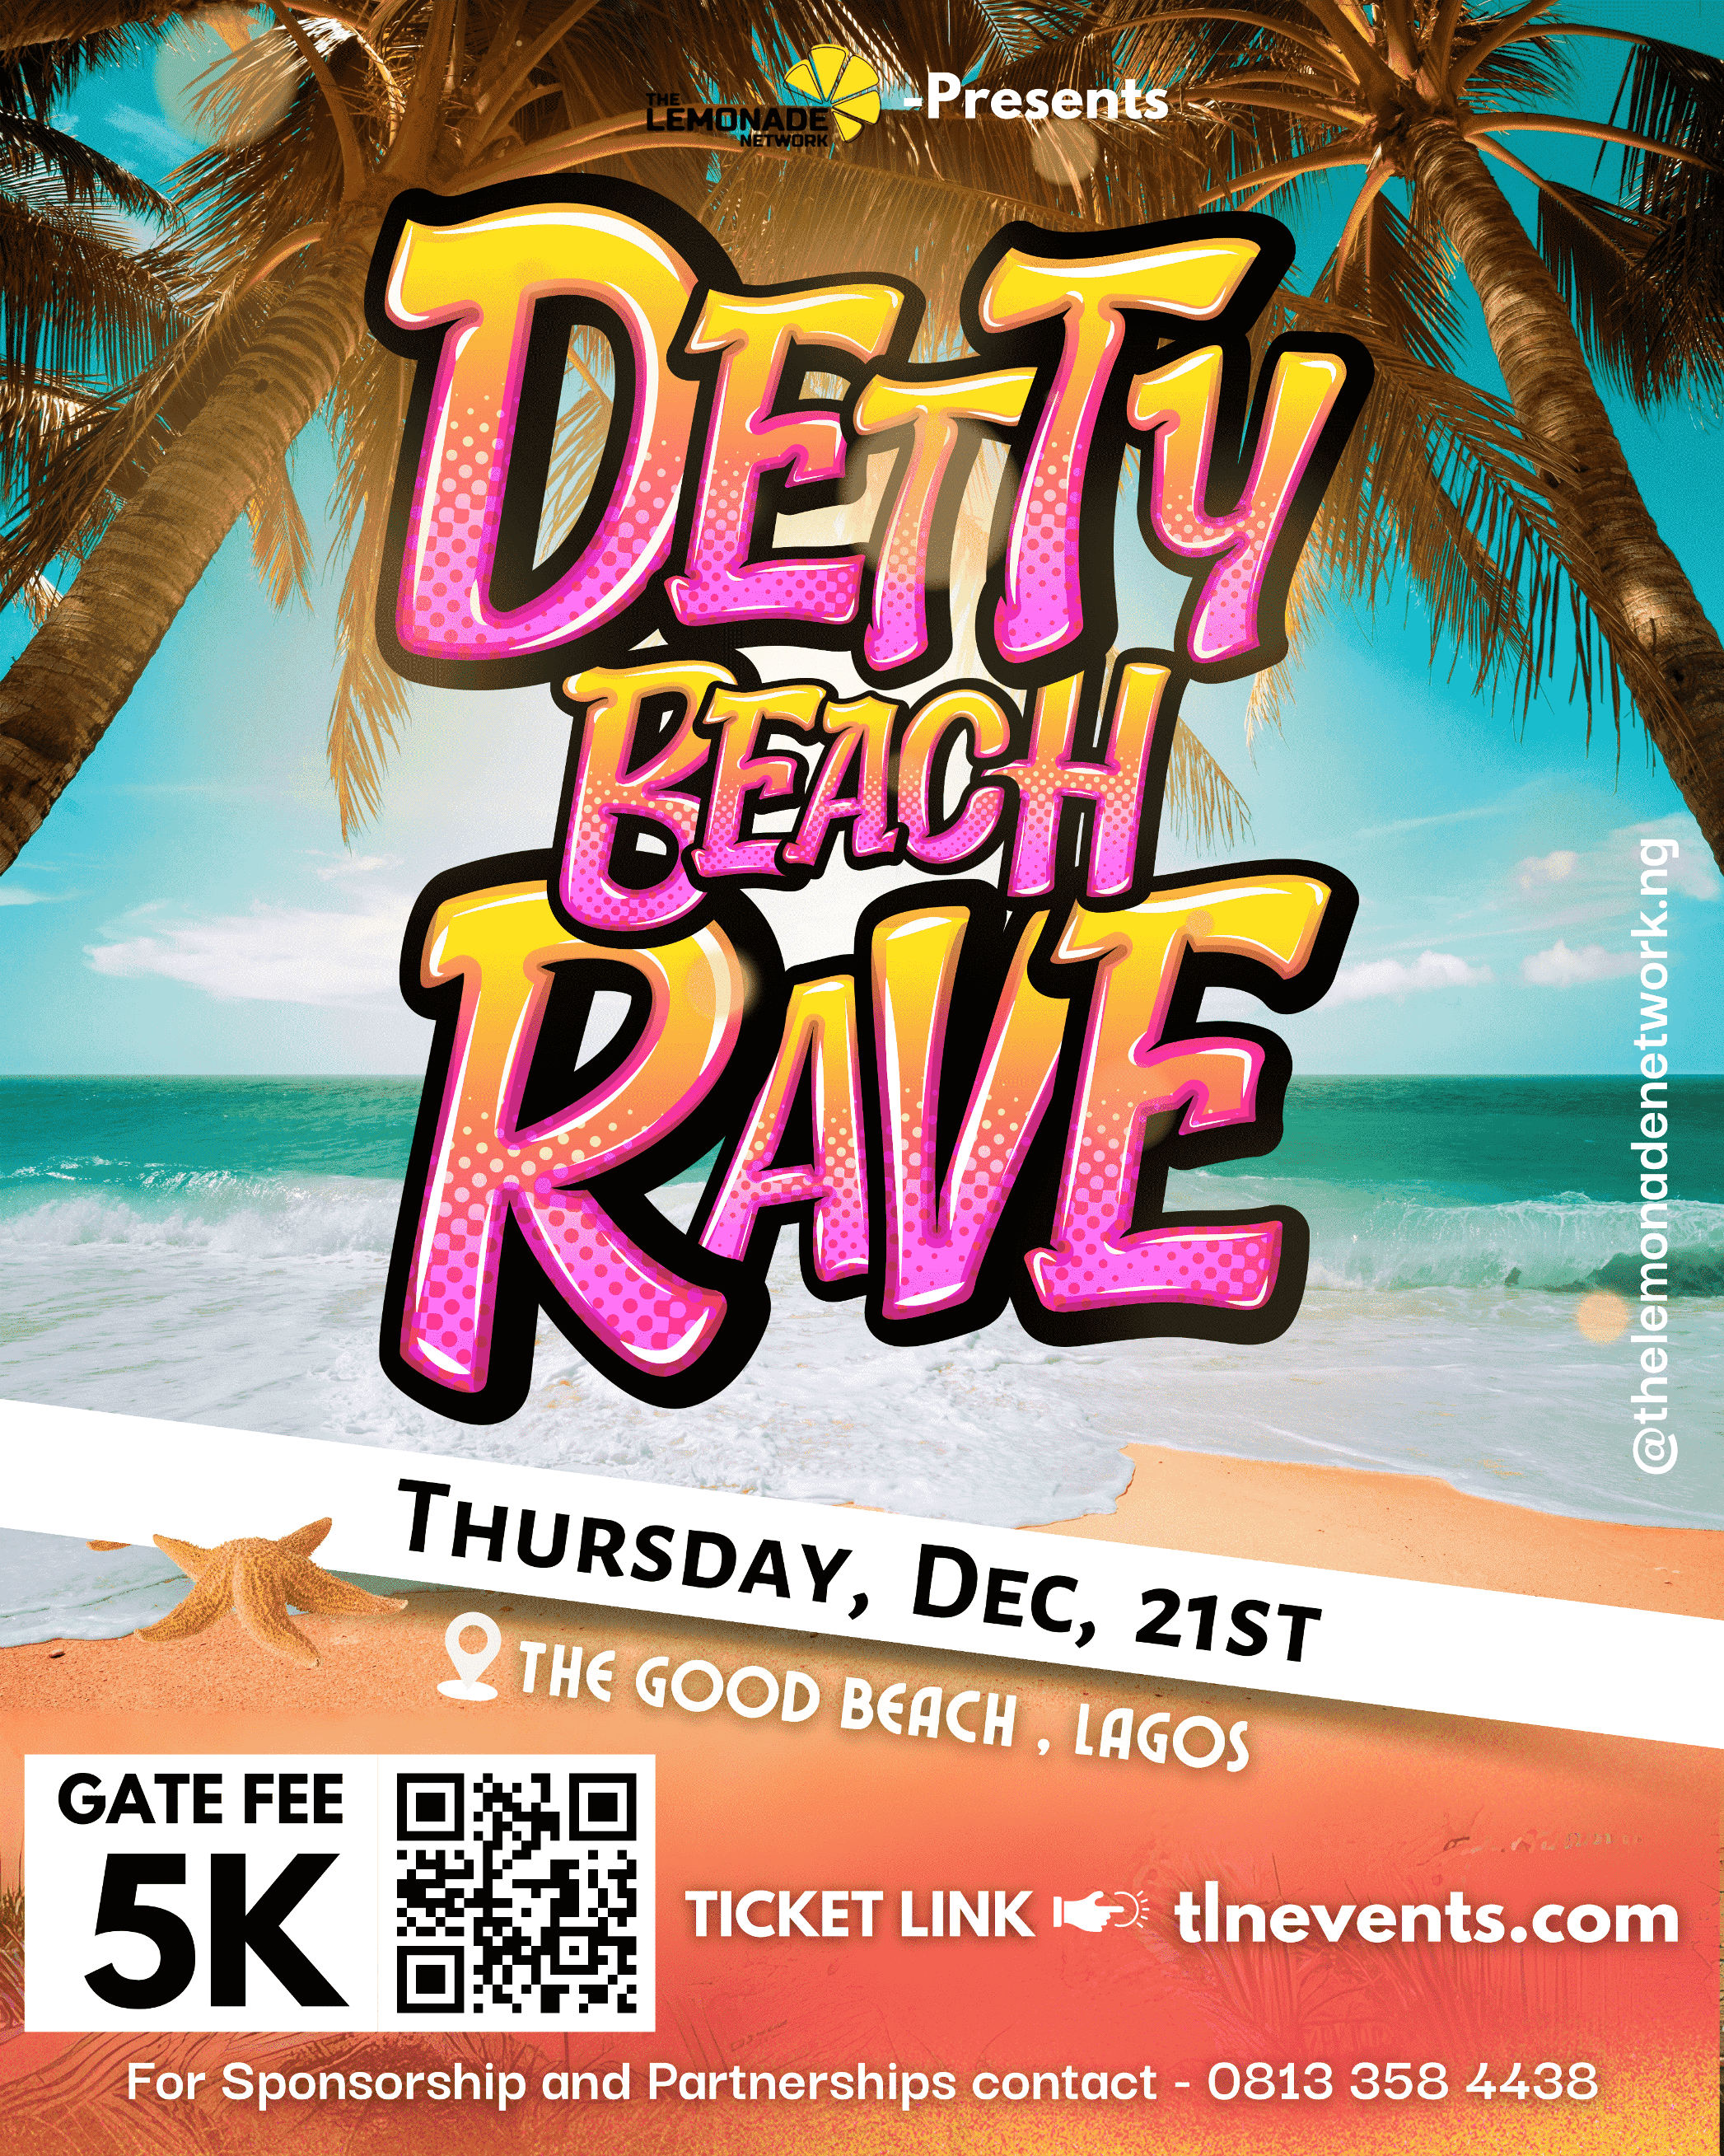 Detty Beach Rave Post free event in Nigeria using tickethub.ng, buy and sell tickets to event